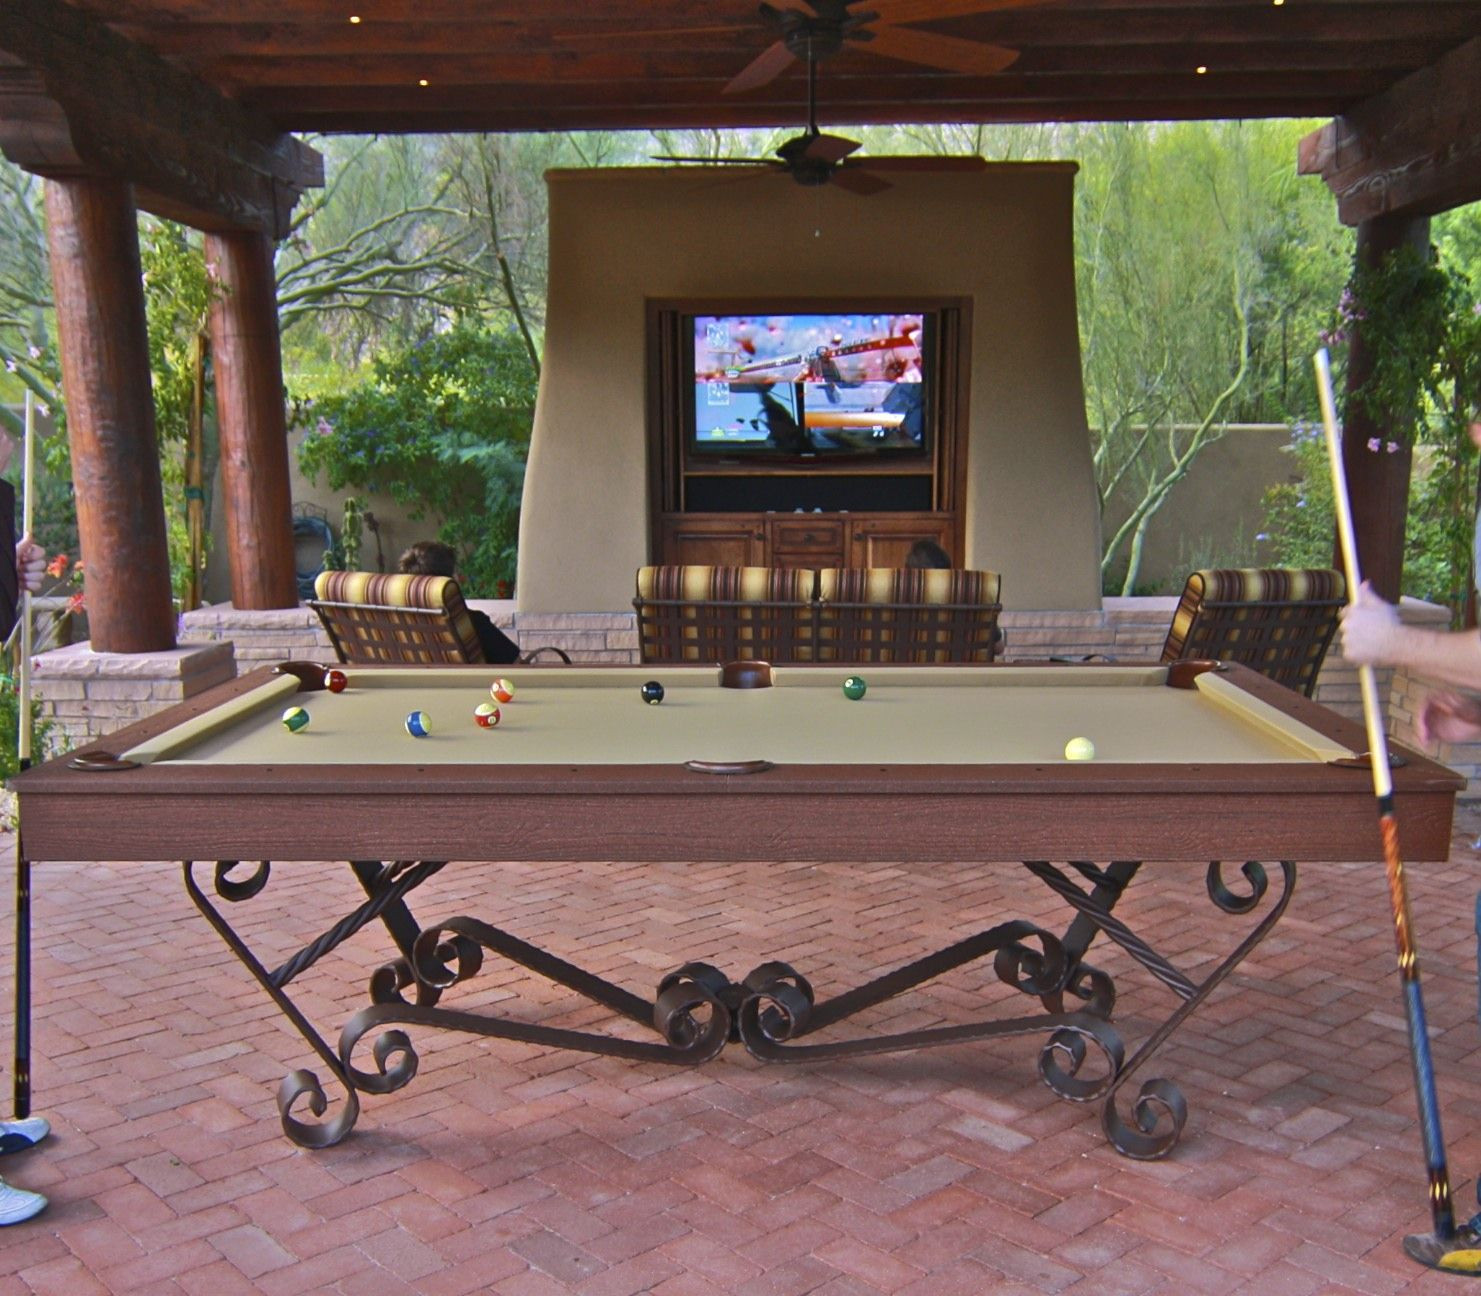 DIY Outdoor Pool Table
 Pool Table outdoors how awesome but adjust shots for